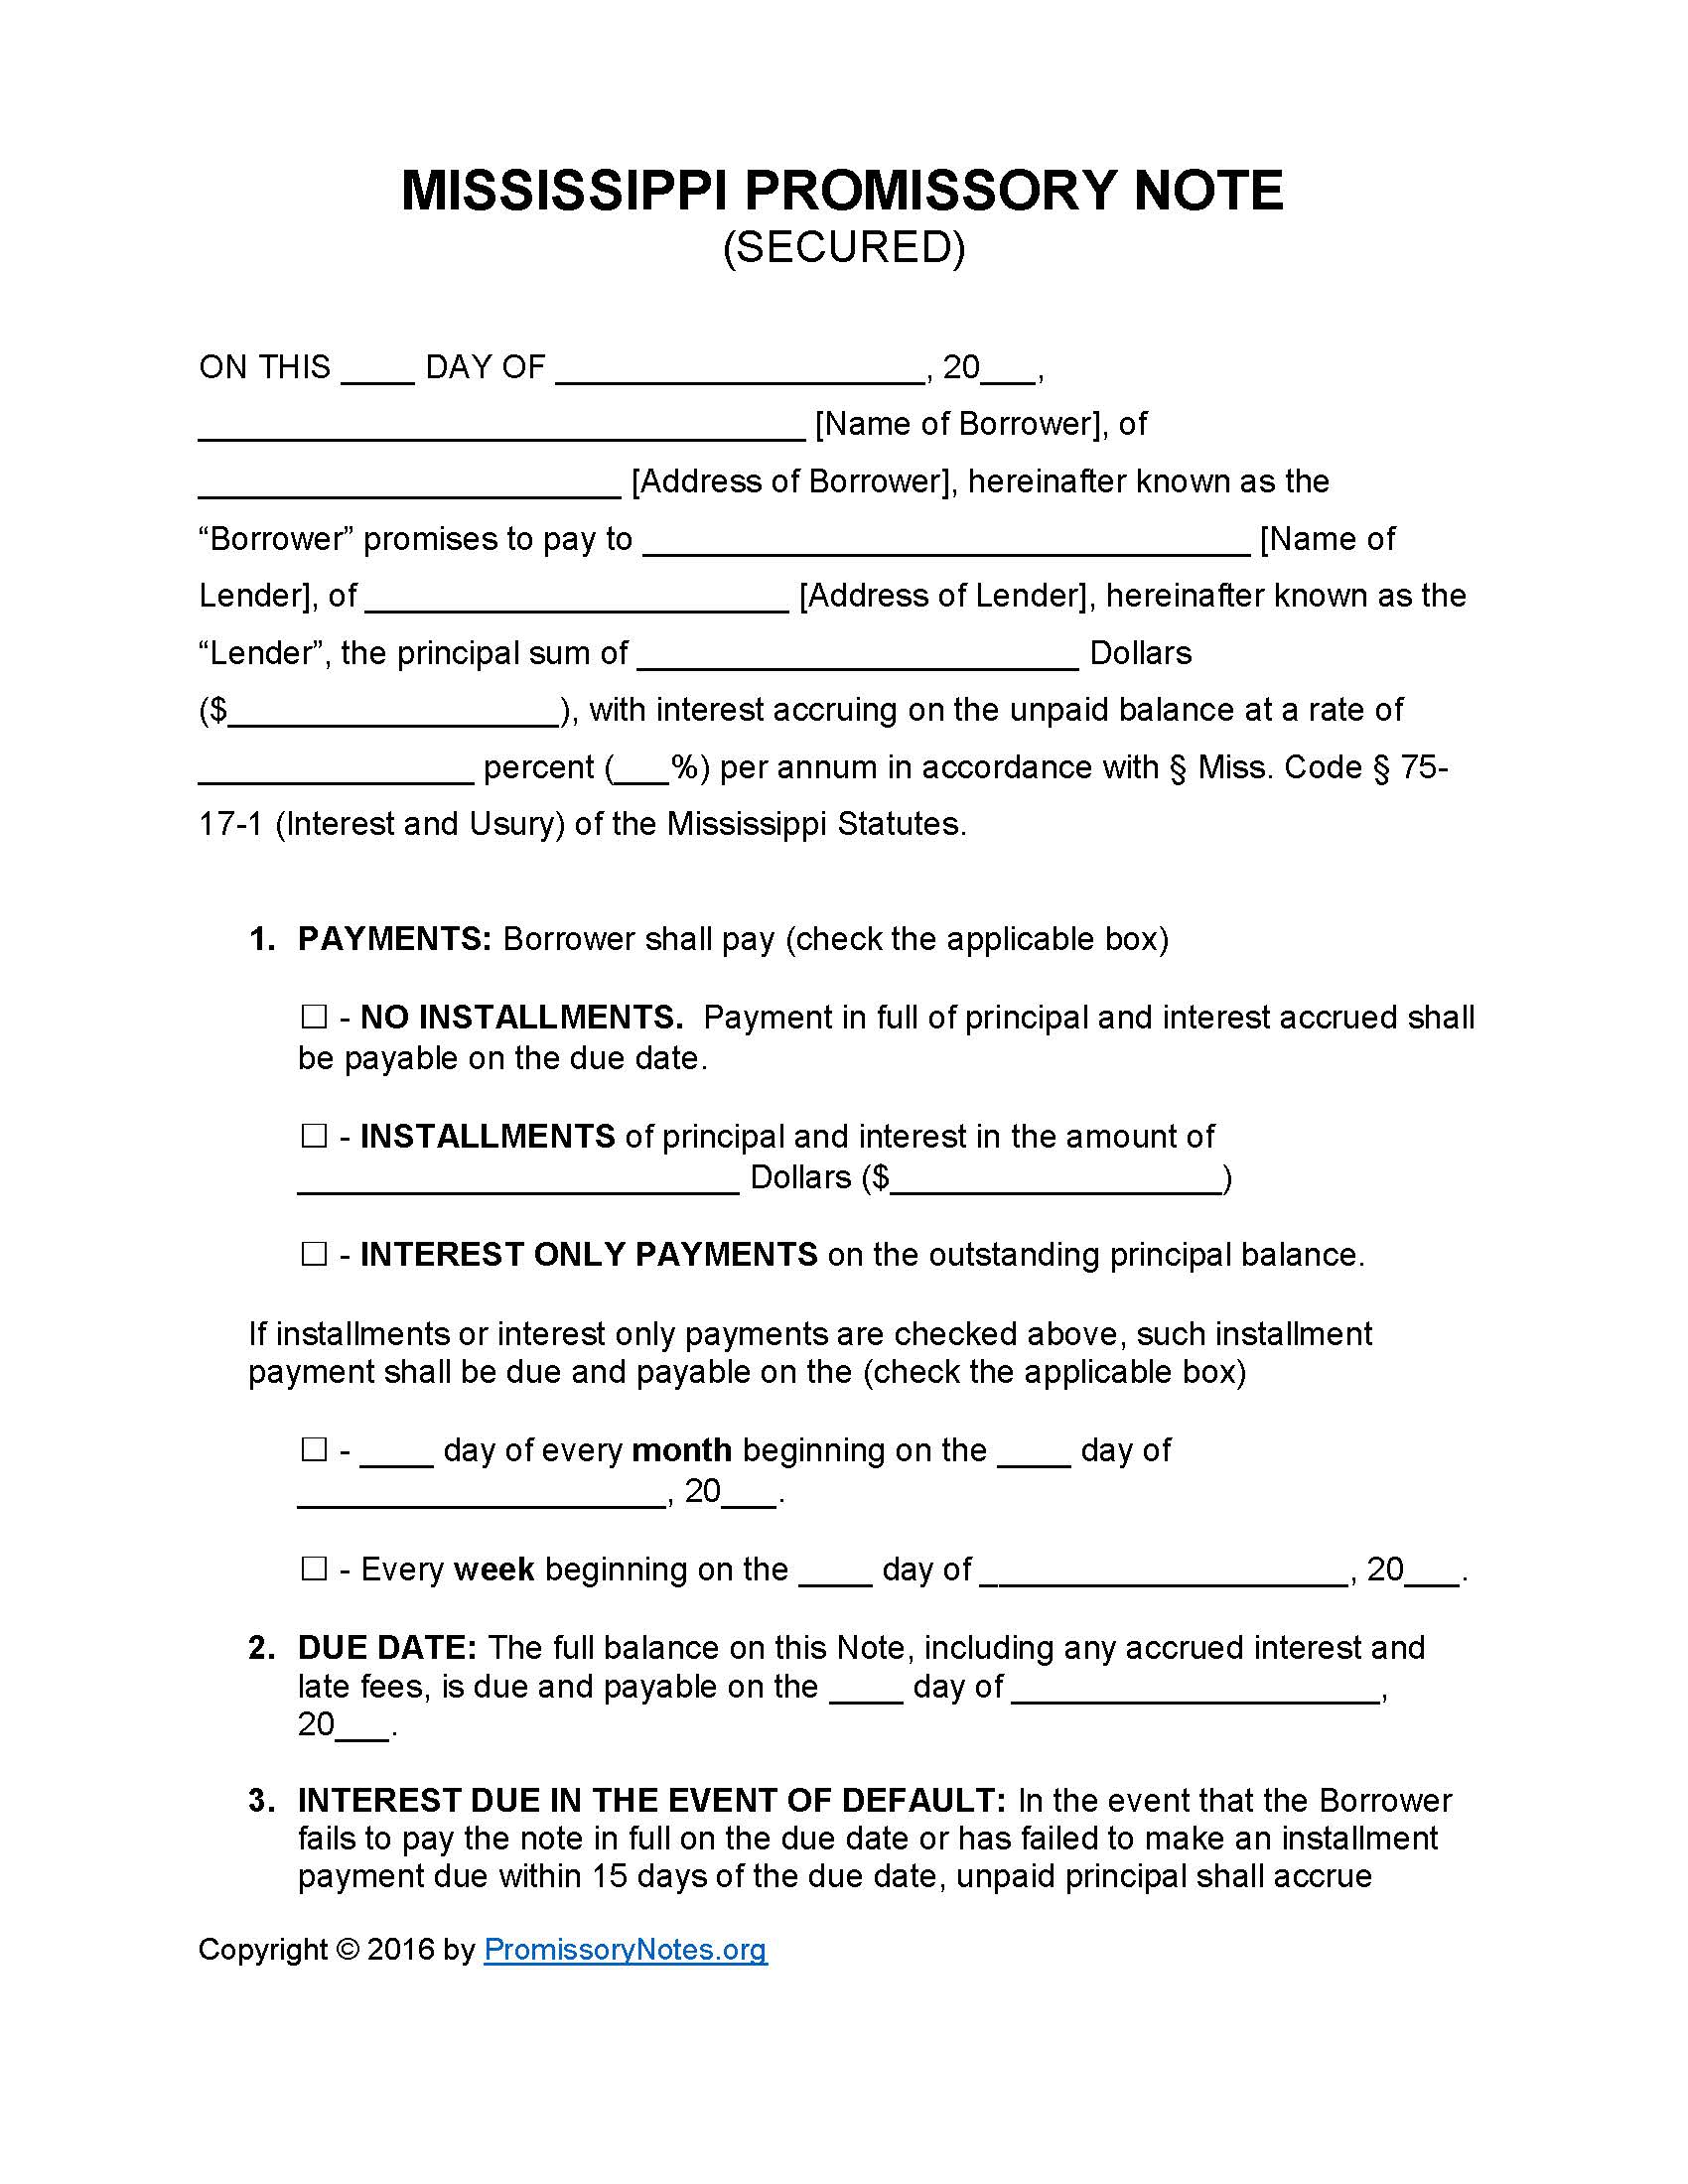 mississippi-secured-promissory-note-form